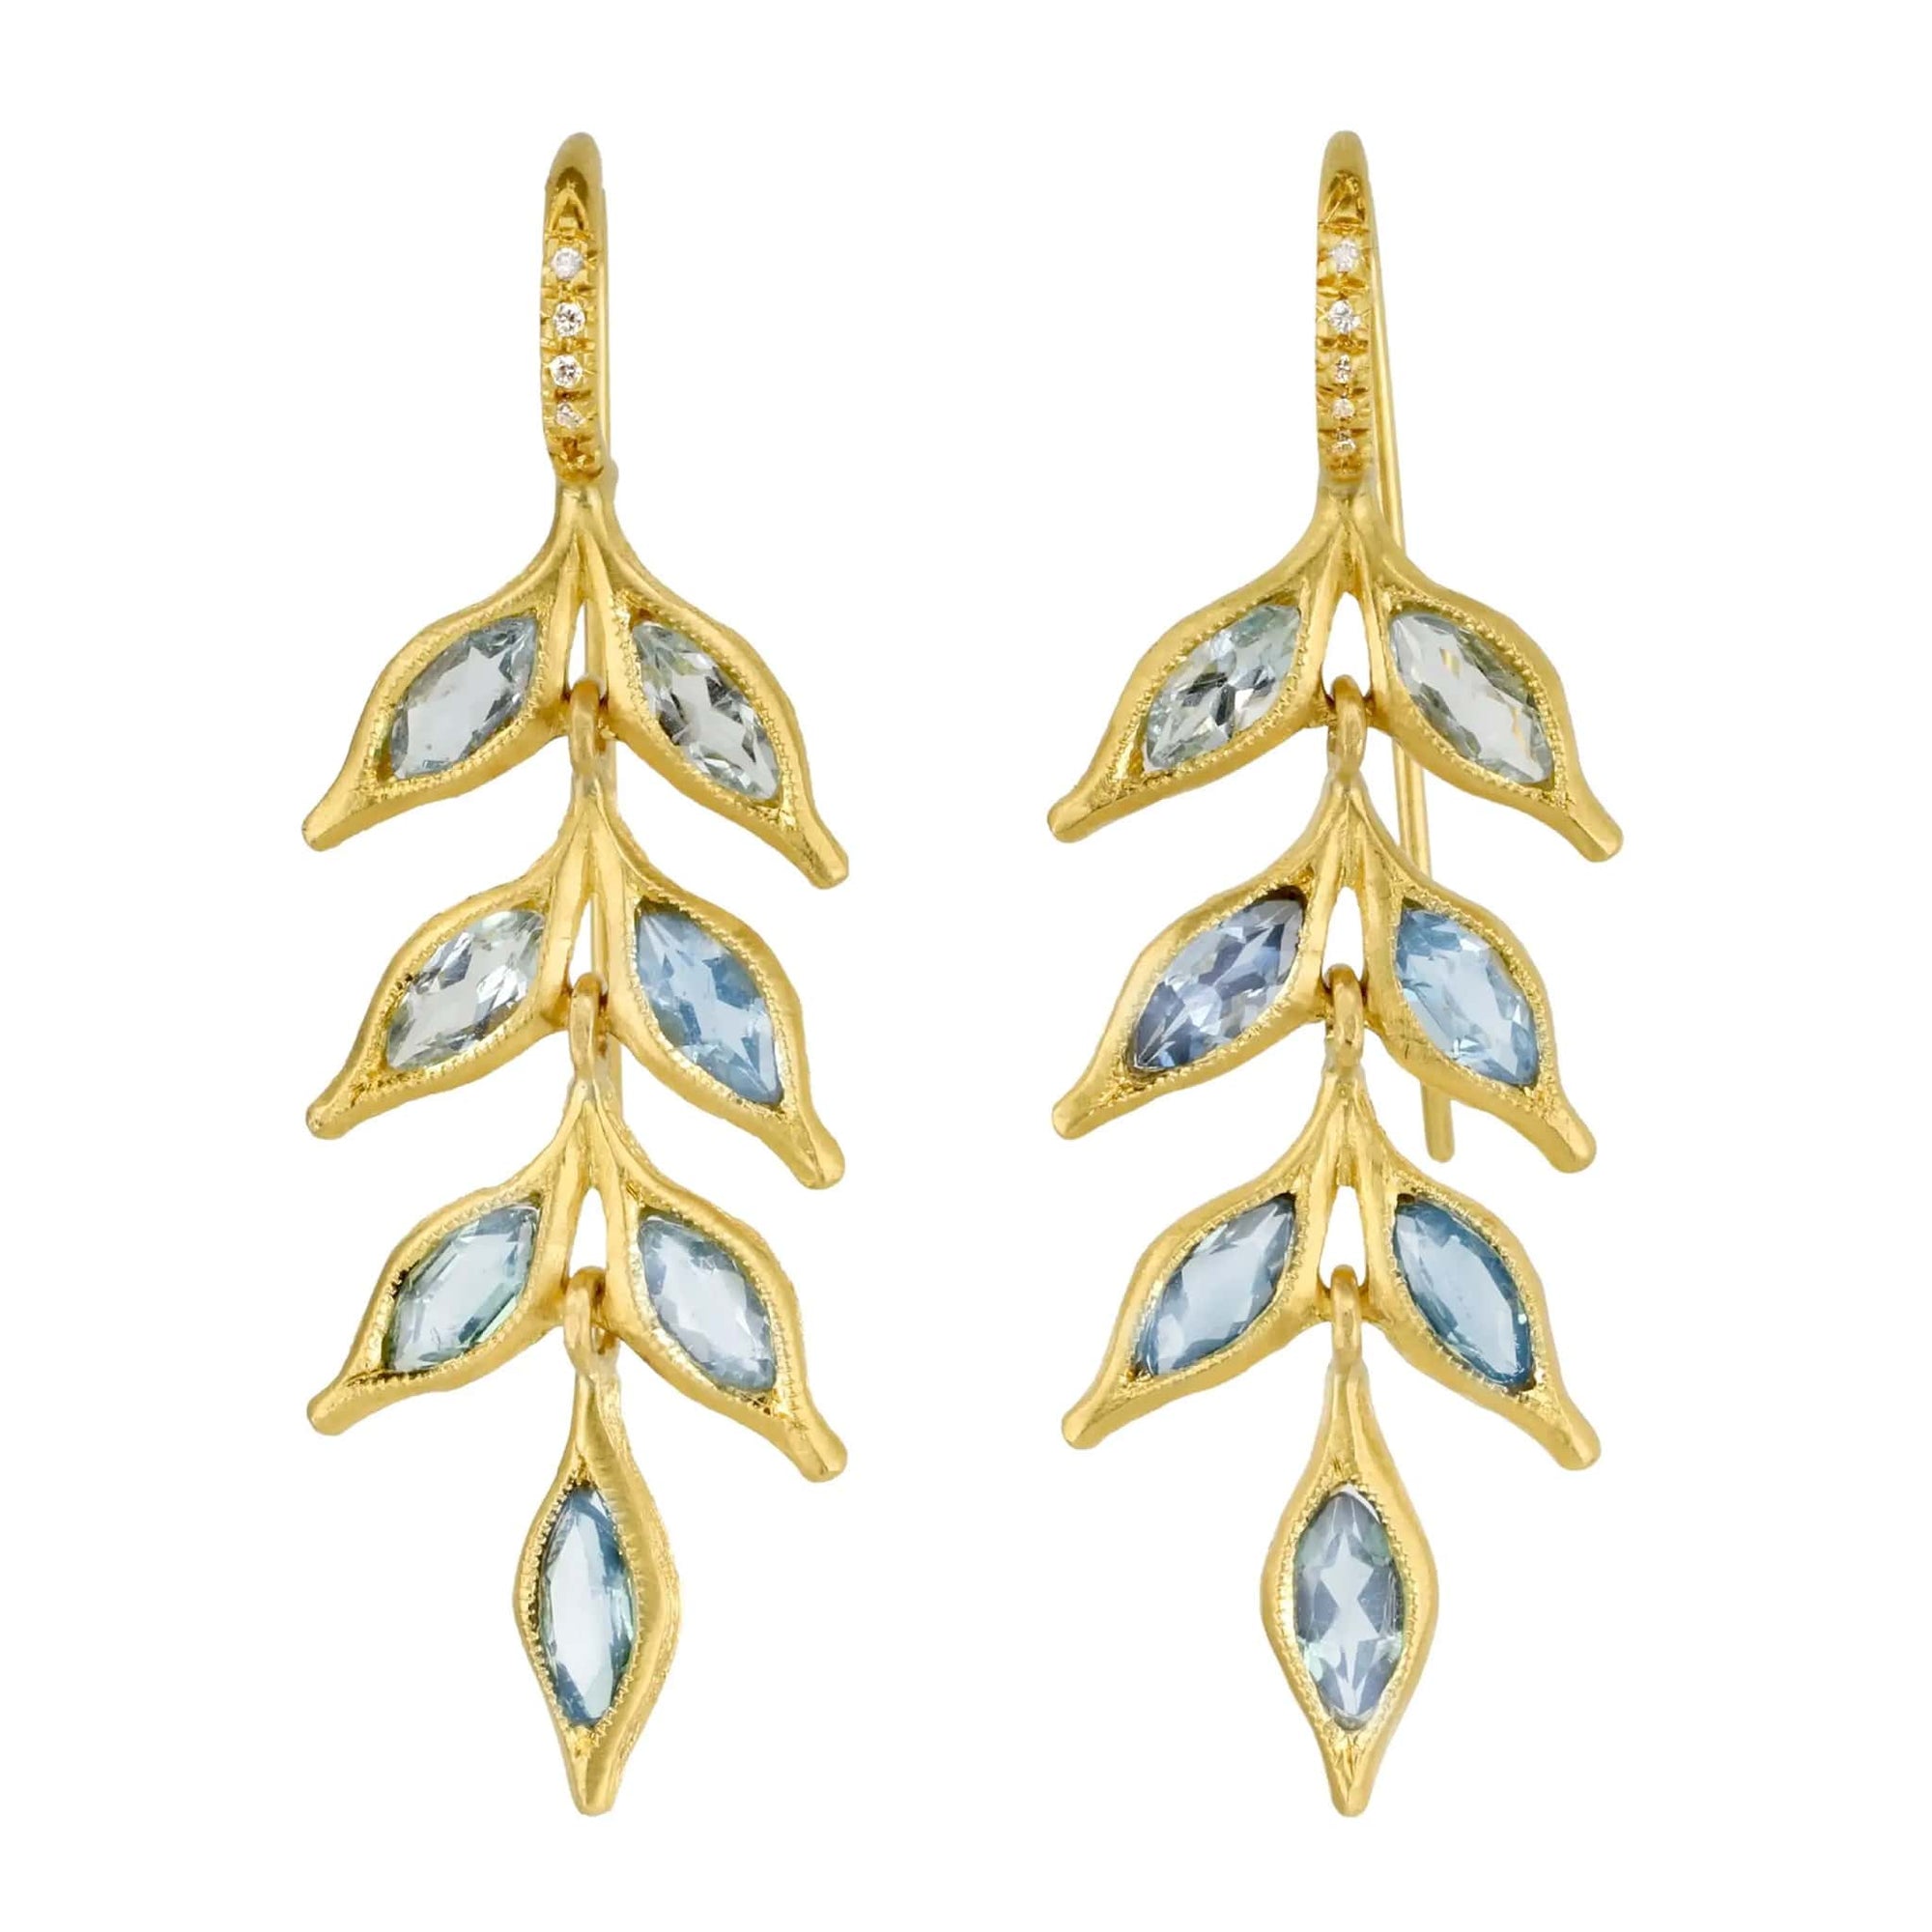 Cathy Waterman 22K Gold Aquamarine Falling Leaf Earrings with White Pave Diamonds